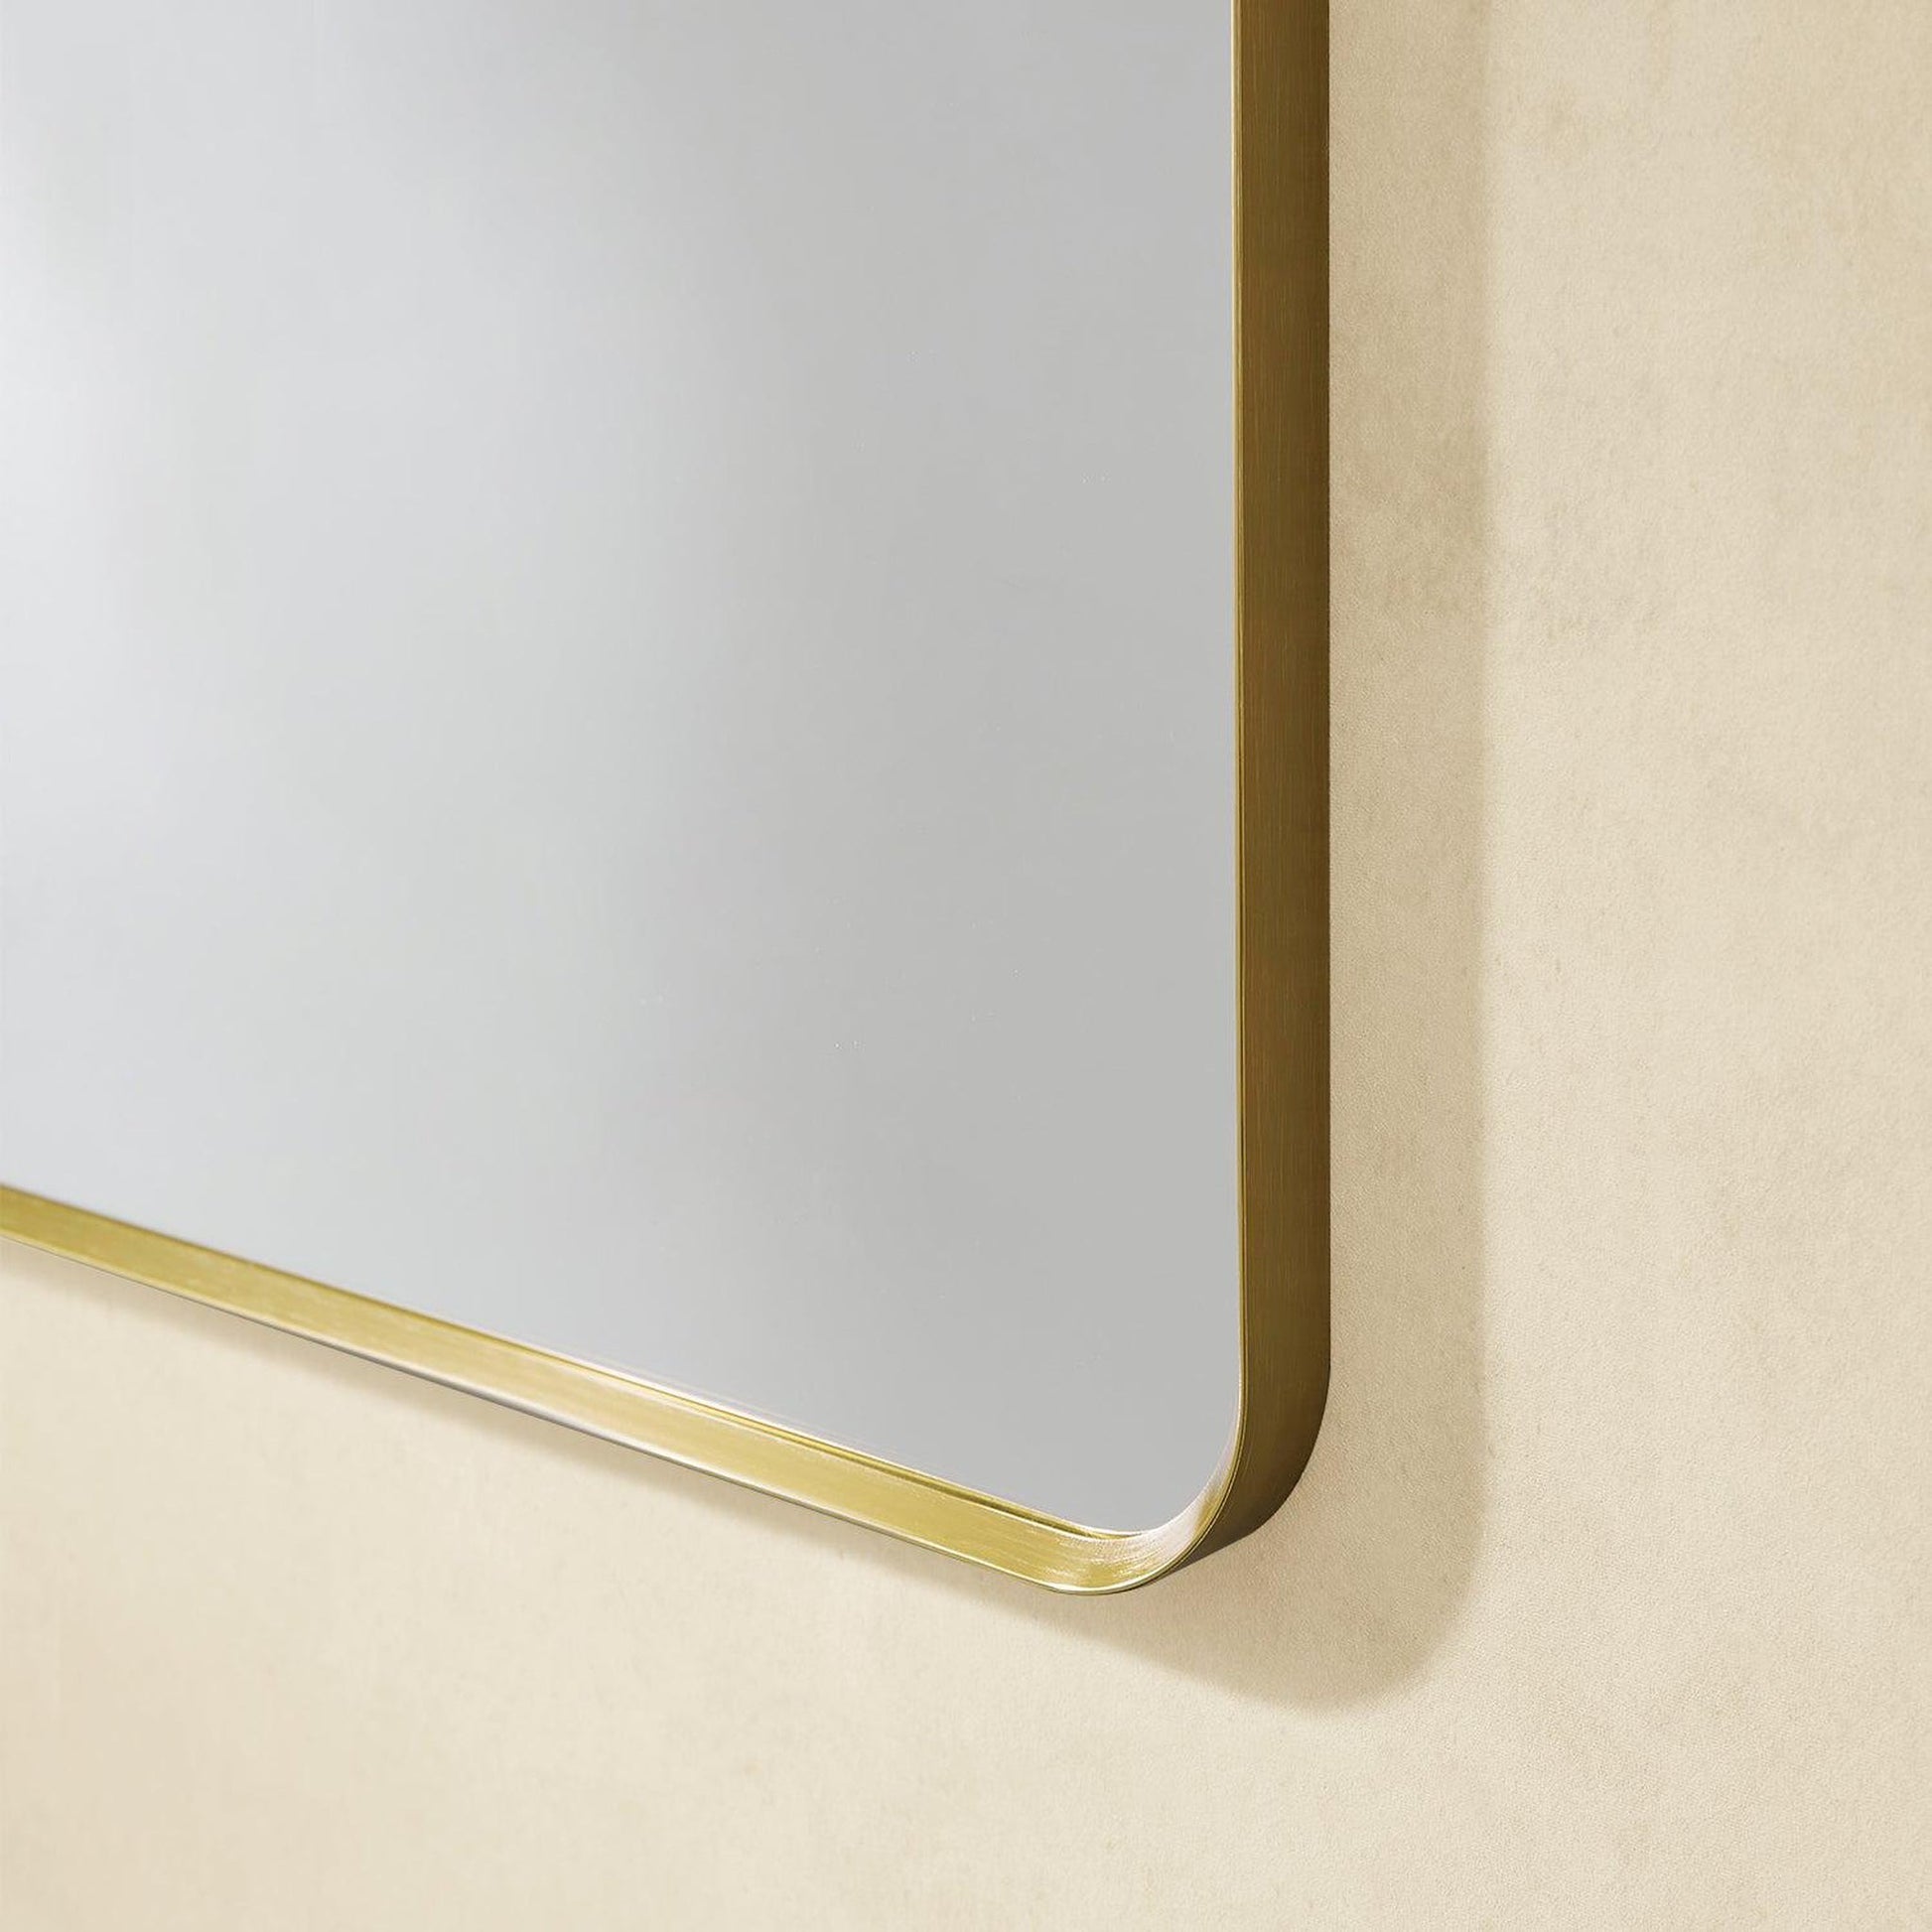 Altair Nettuno 36" x 30" Rectangle Brushed Gold Aluminum Framed Wall-Mounted Mirror